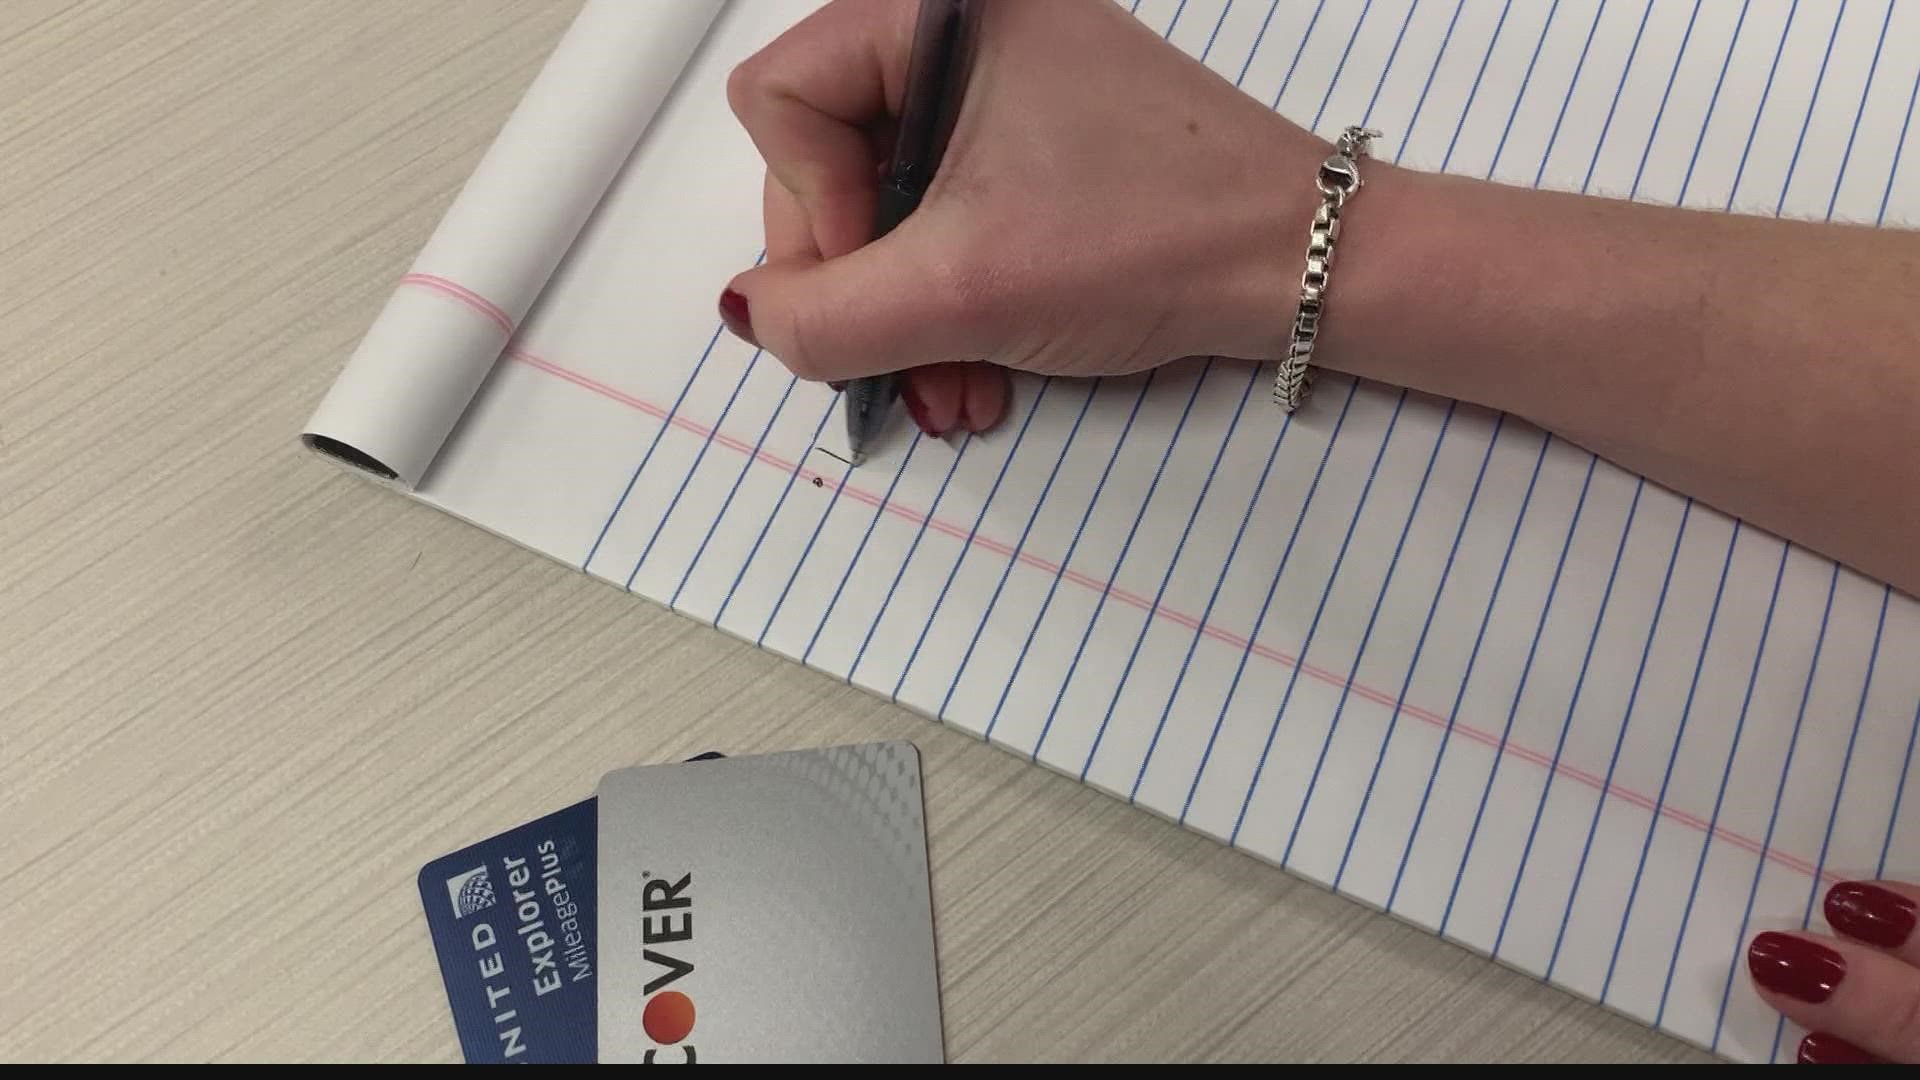 Credit cards can be a good tool when they're used responsibly. Allison Gormly shows us how to revisit your cards' rewards.